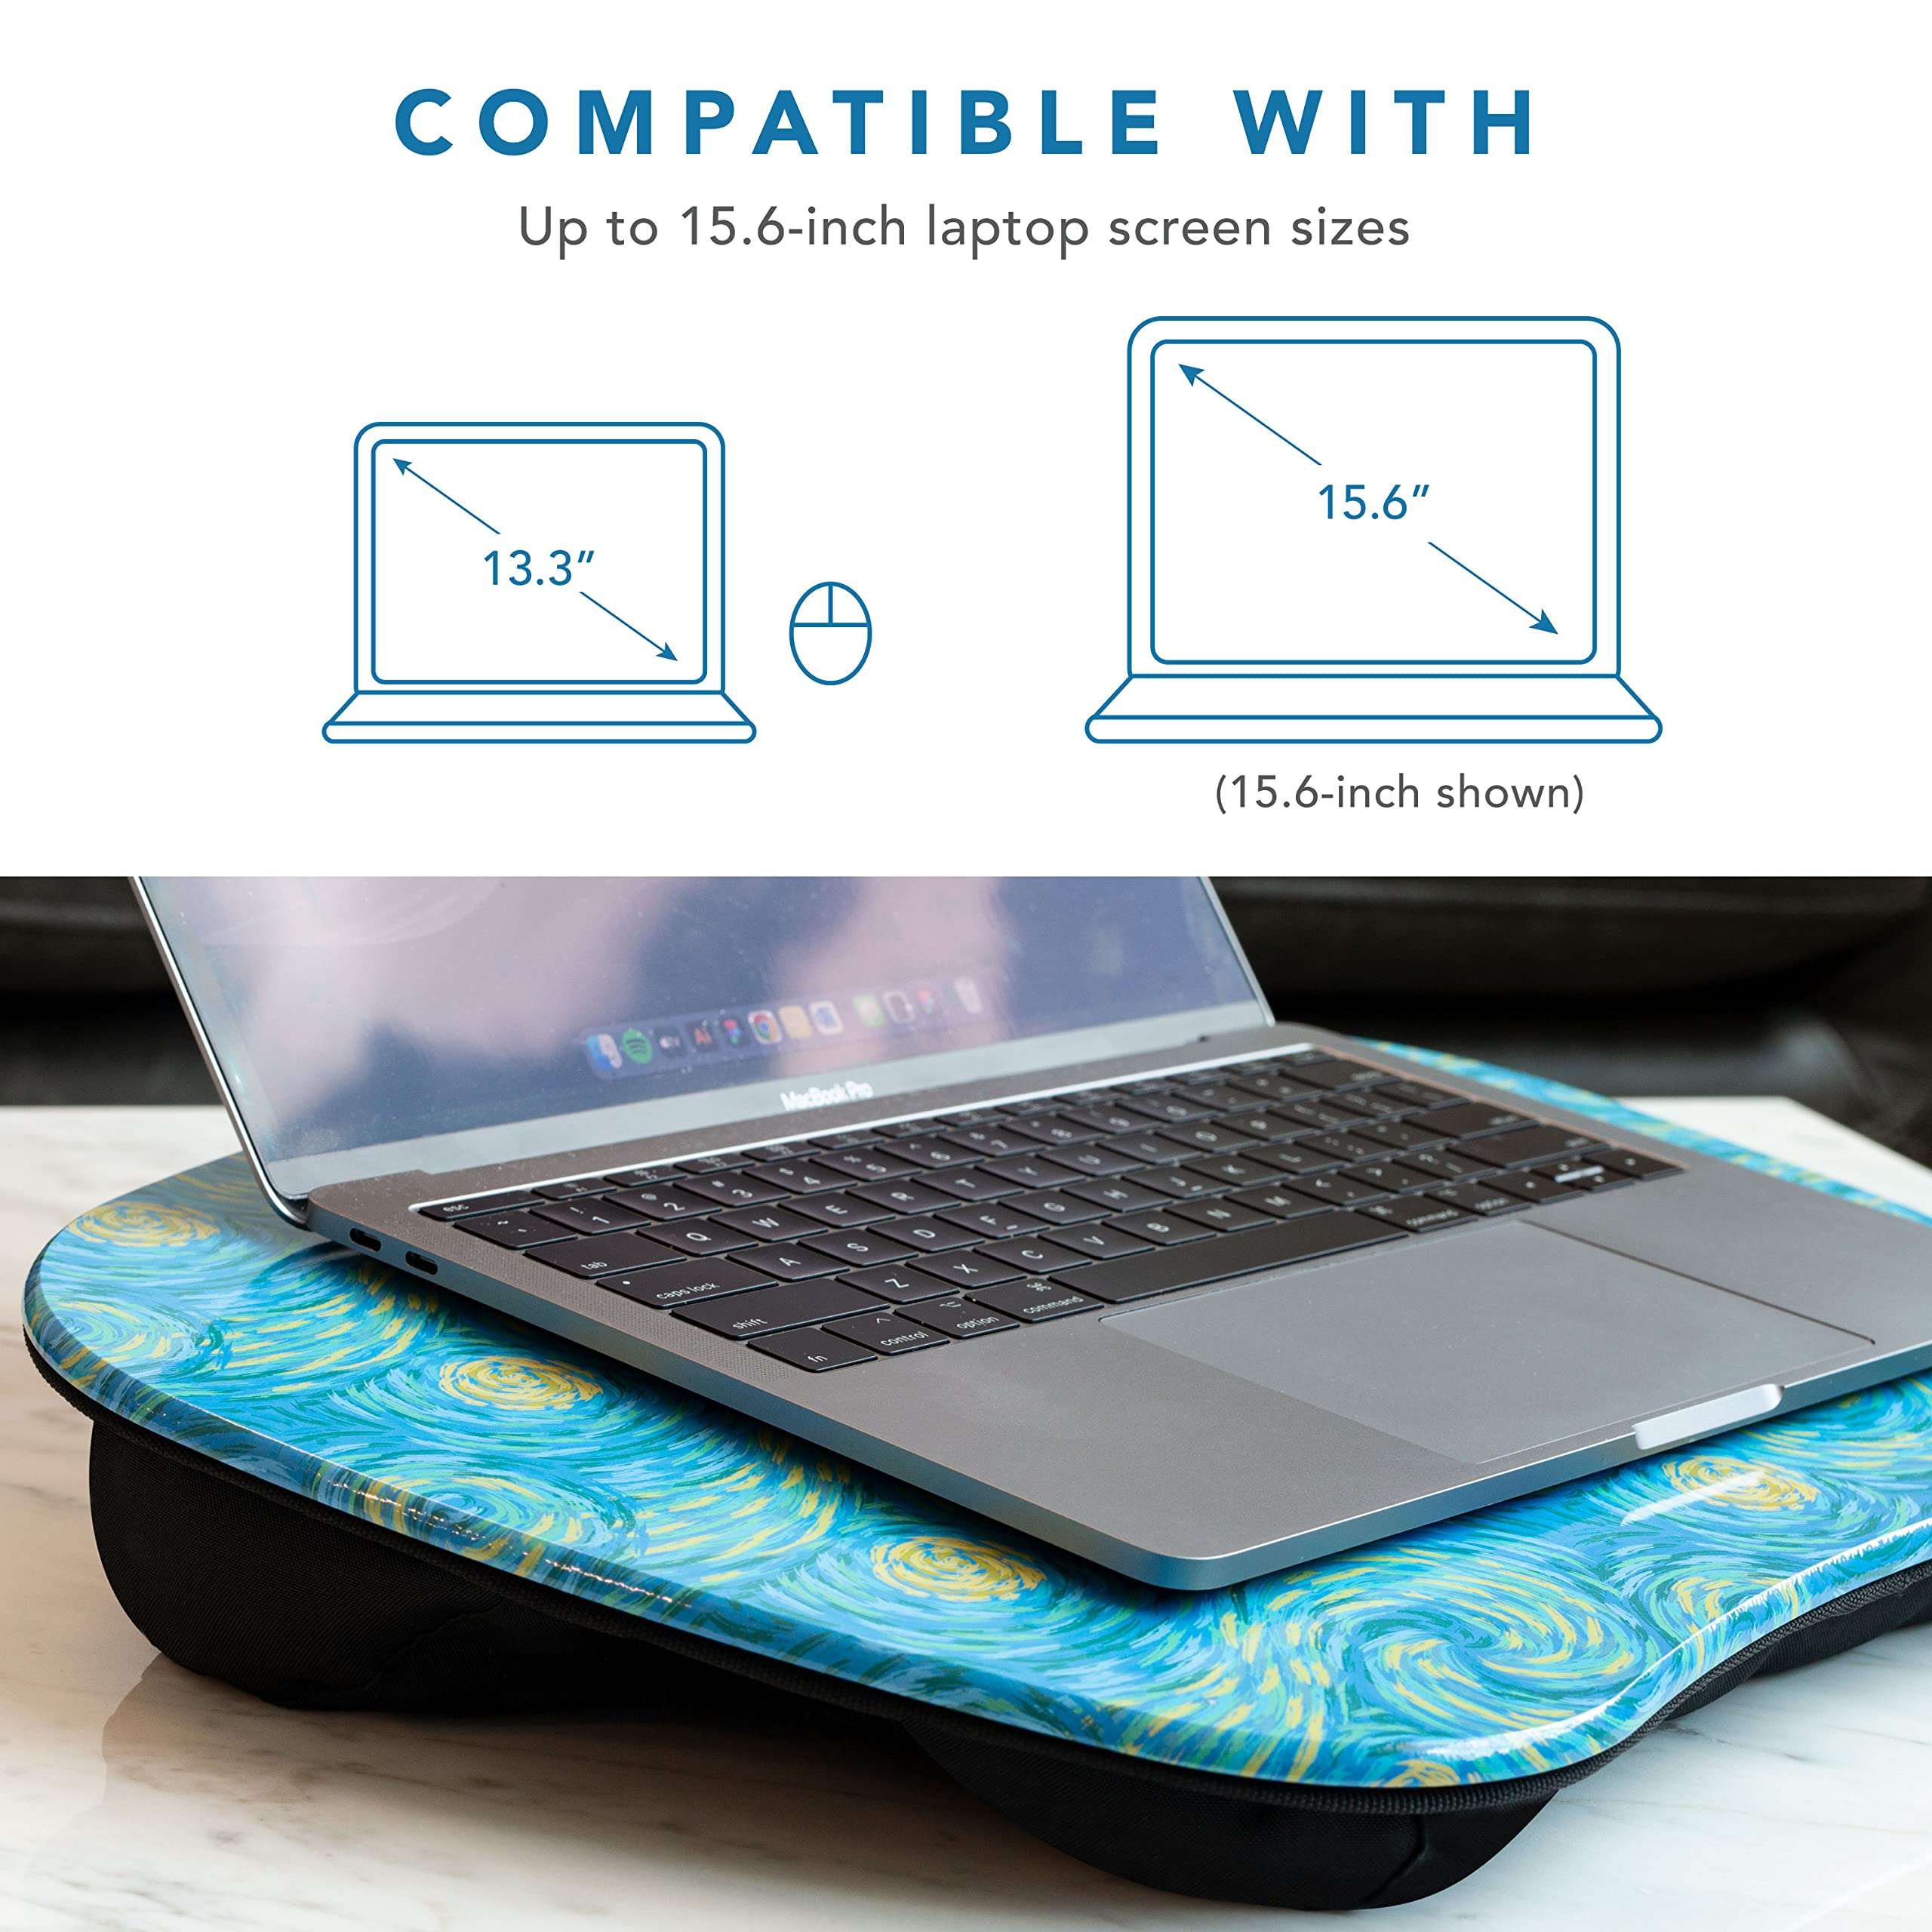 LapGear MyStyle Portable Lap Desk with Cushion - Starry Blue - Fits up to 15.6 Inch Laptops - Style No. 45339